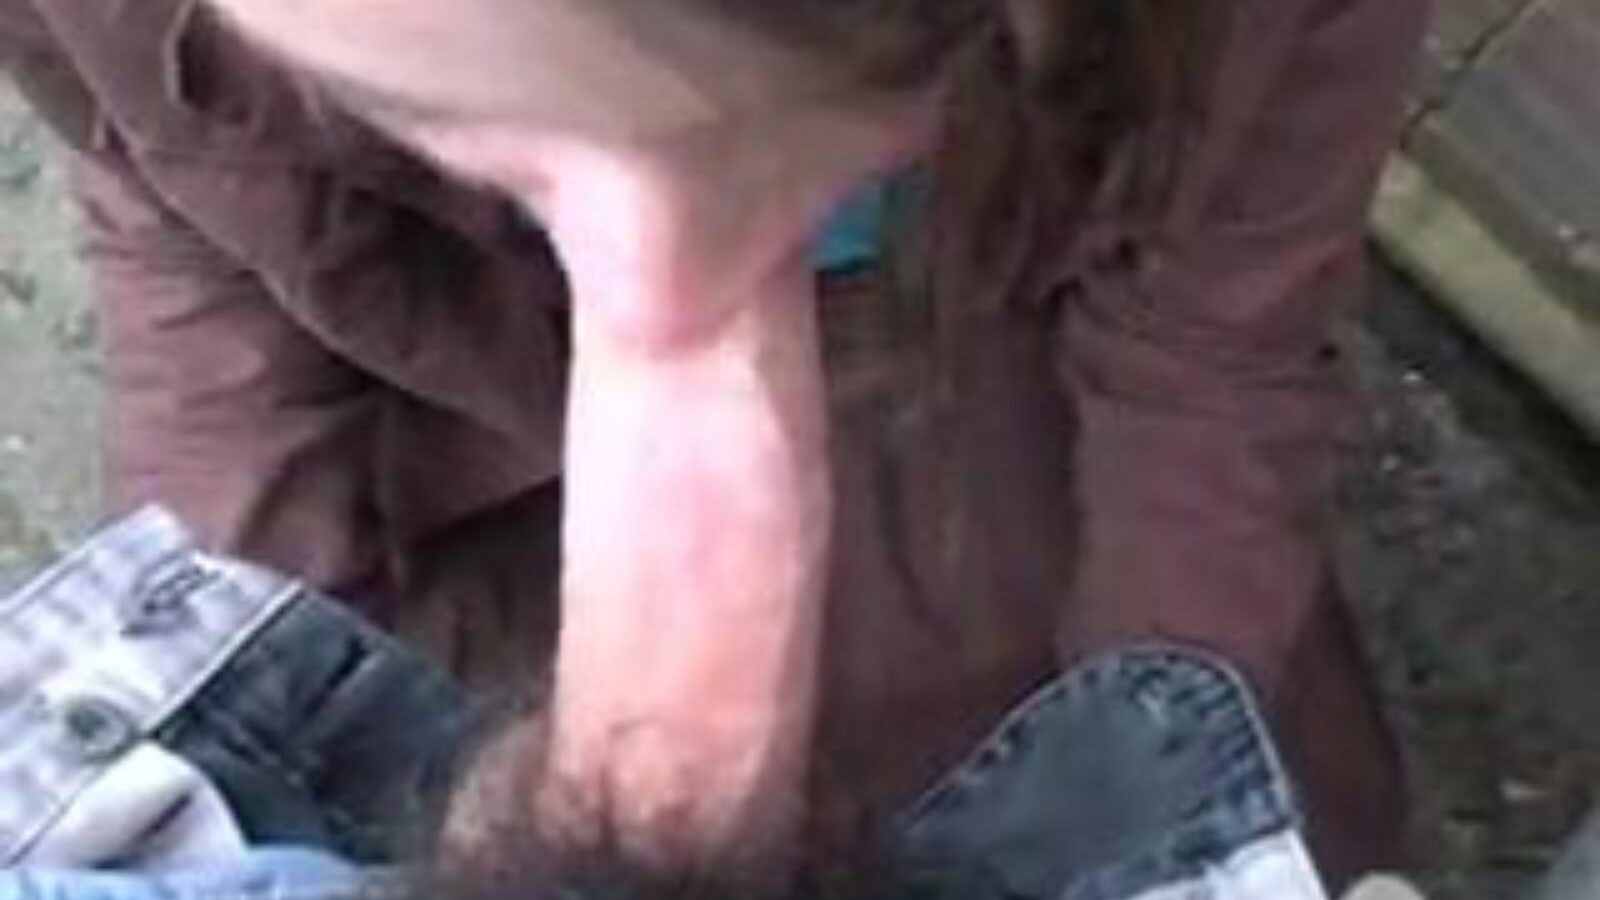 Isi Am Sportplatz: Free Outdoor Porn Video 11 - xHamster Watch Isi Am Sportplatz tube fuck-fest video for free-for-all on xHamster, with the excellent bevy of German Outdoor, Amateur & Hardcore pornography video sequences